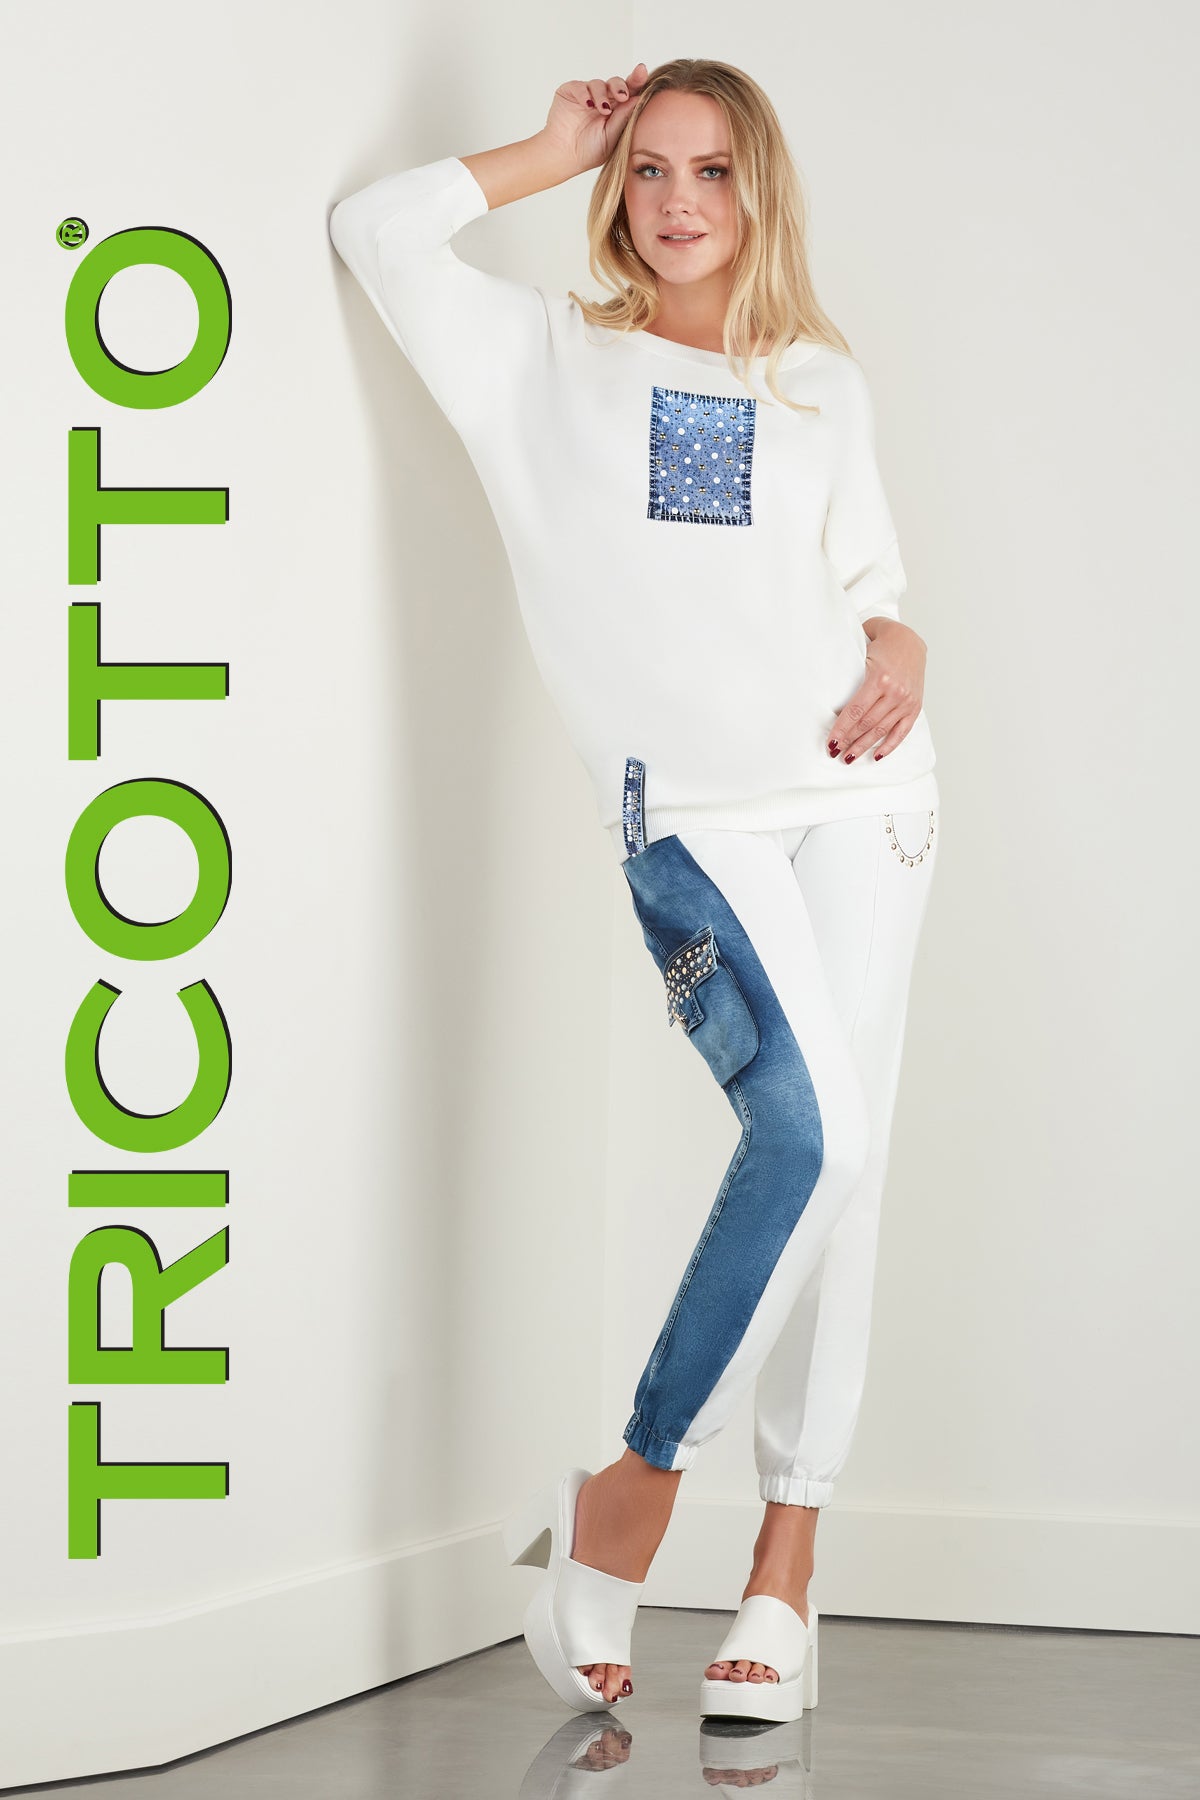 Tricotto Off white tunic sweater with sequin pearl detail on front in generous fitting style